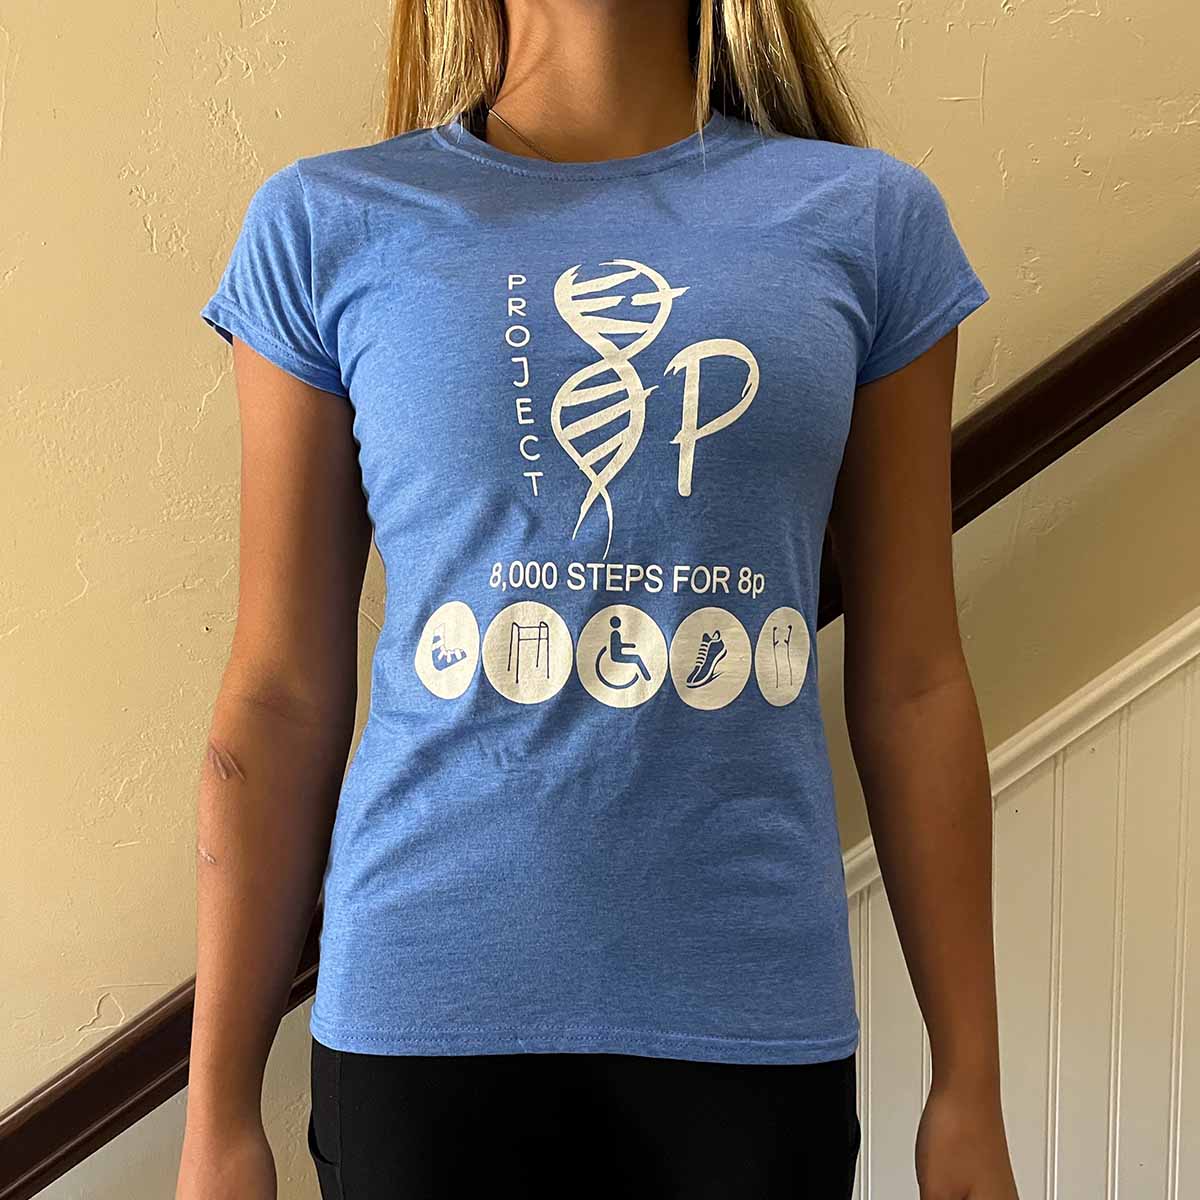 2022 8000 Steps for 8p Shirt Adult